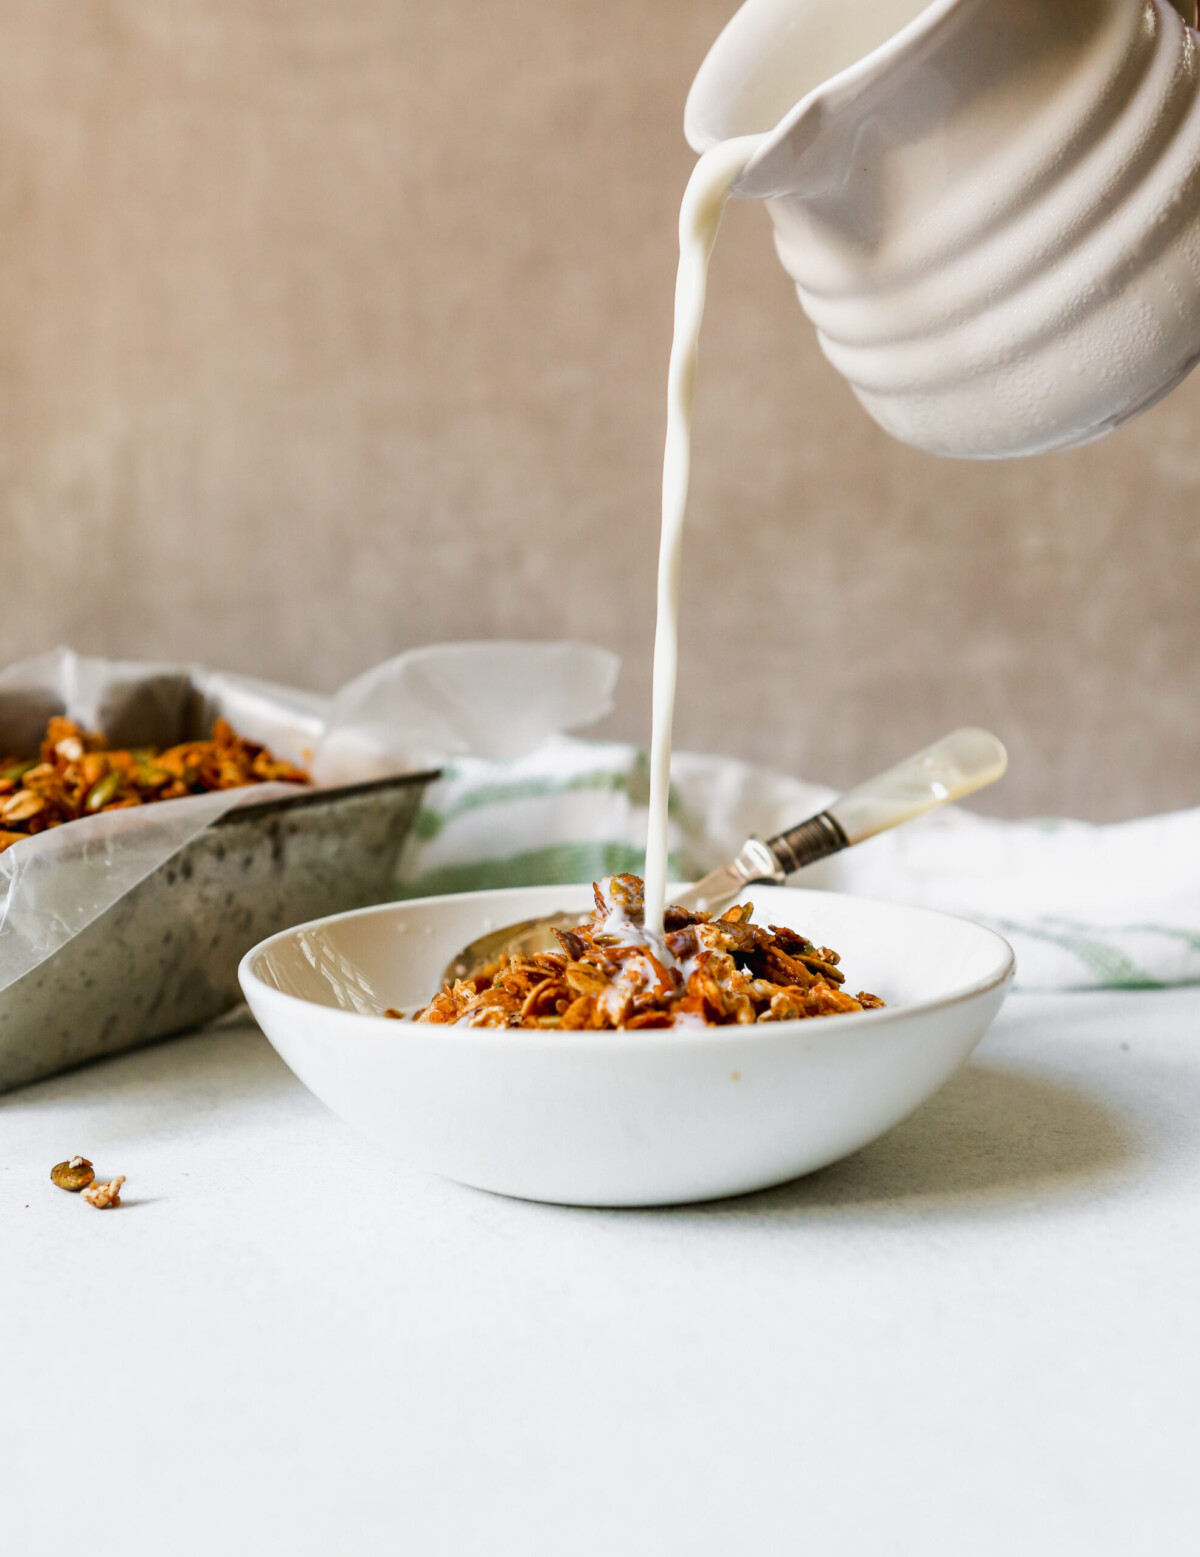 Homemade healthy granola in a white bowl with milk pouring into it.